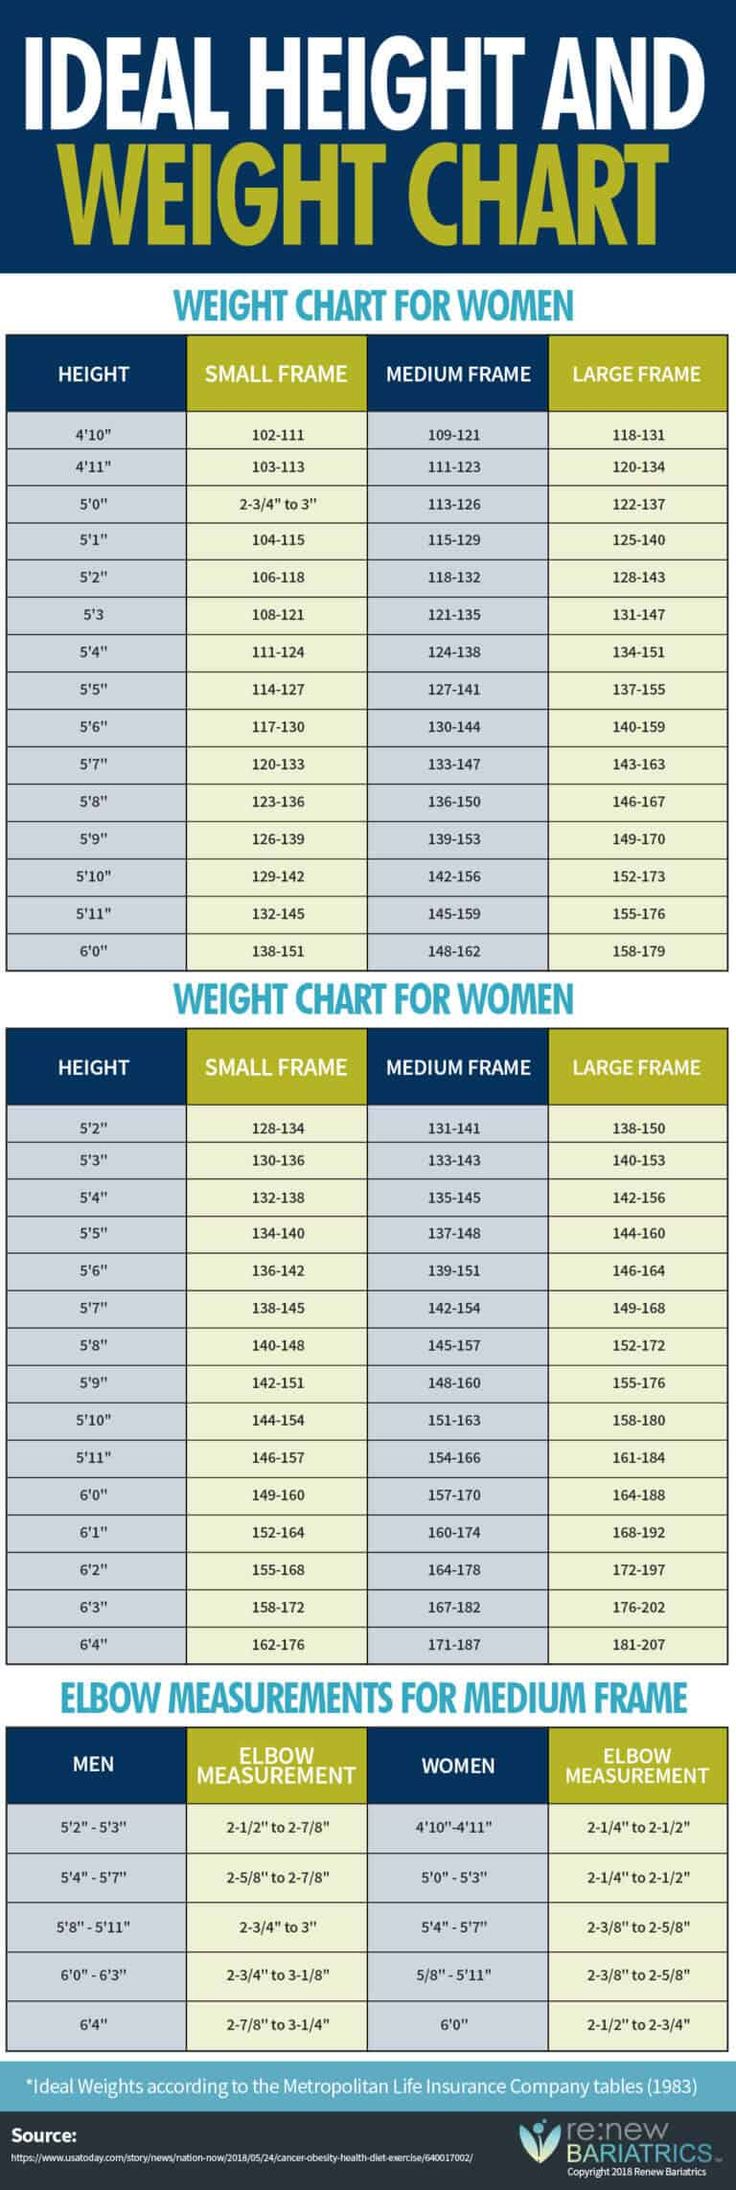 Healthy Weight For Males